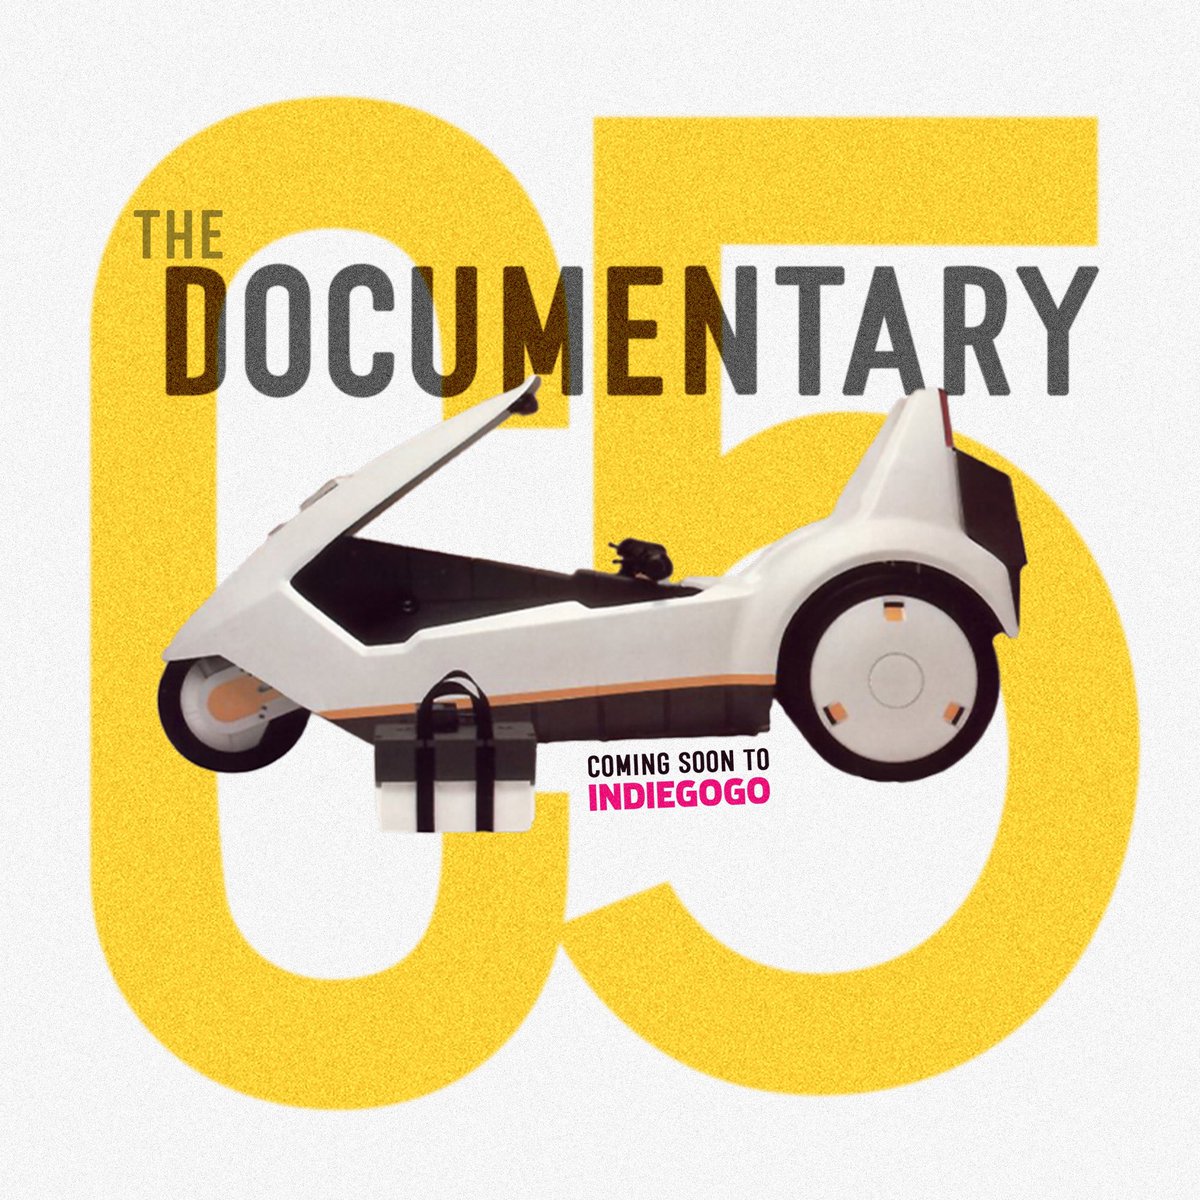 Let the countdown to launch begin! #documentary #SinclairC5 #C5 #zxspectrum #SirCliveSinclair